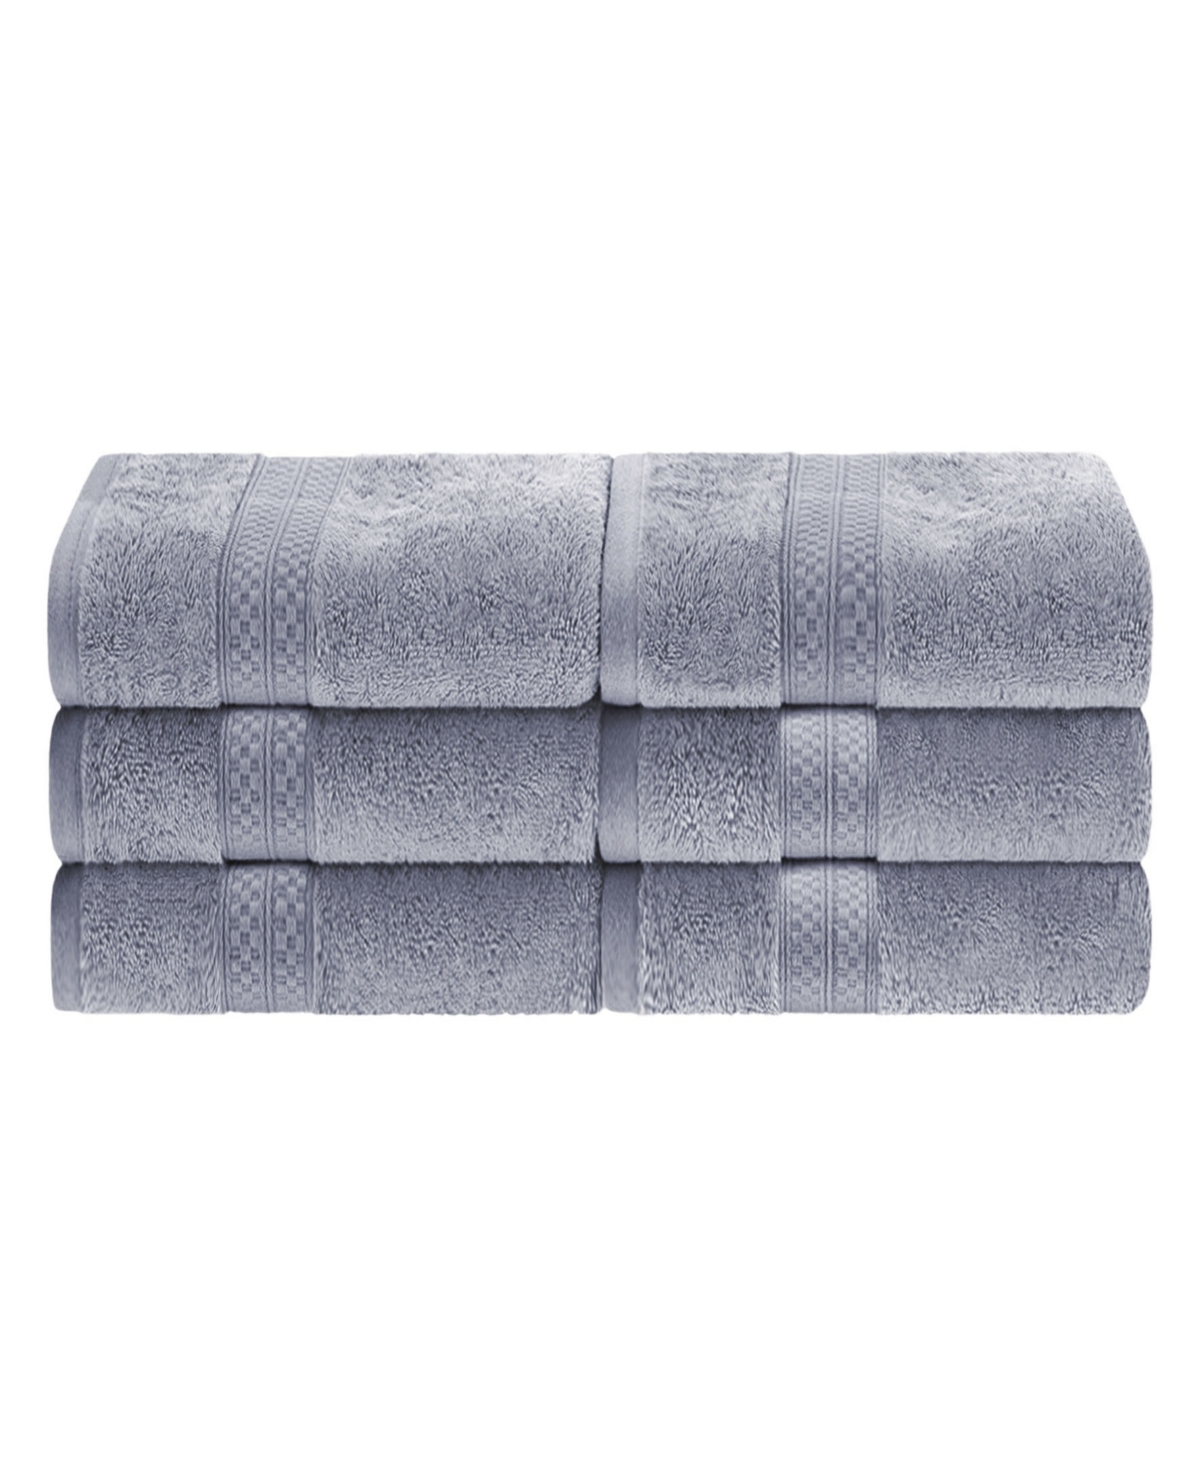 Superior Rayon From Bamboo Blend Ultra Soft Quick Drying 6 Piece Hand Towel Set, 30" L X 16" W In Chrome